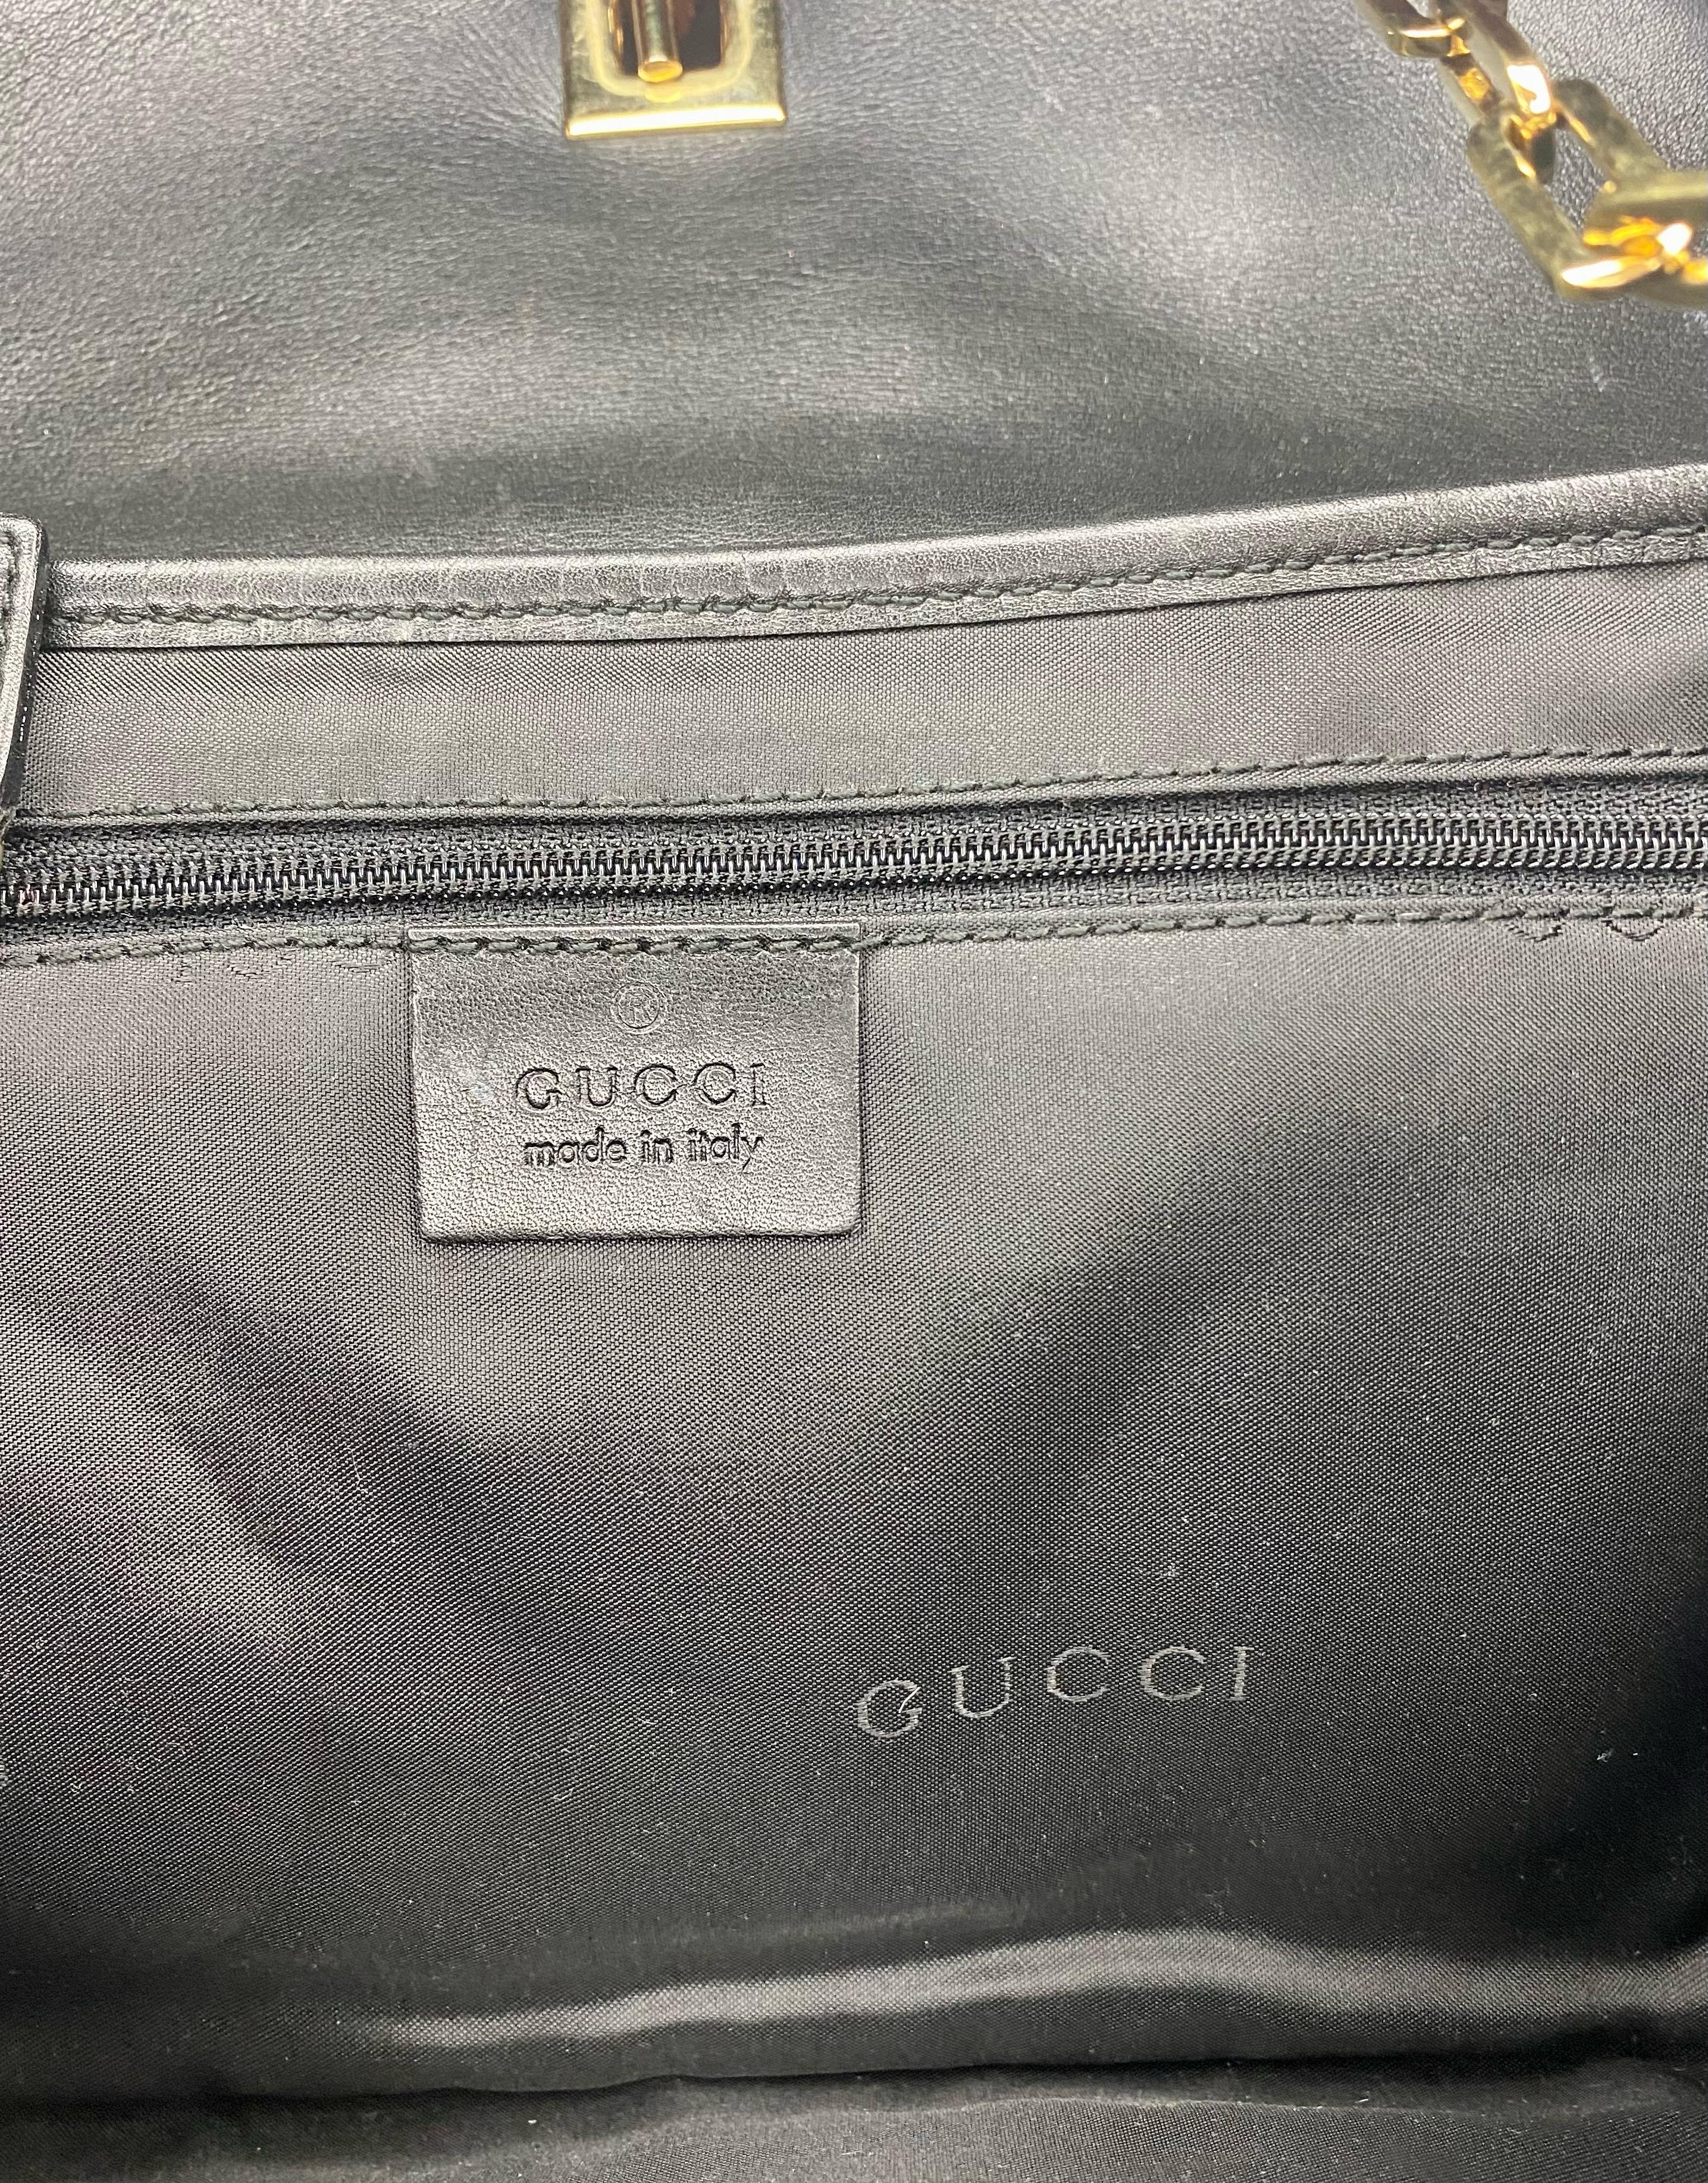 F/W 2000 Gucci by Tom Ford Black 'GG' Crossbody Dionysus Tiger Bag In Excellent Condition For Sale In West Hollywood, CA